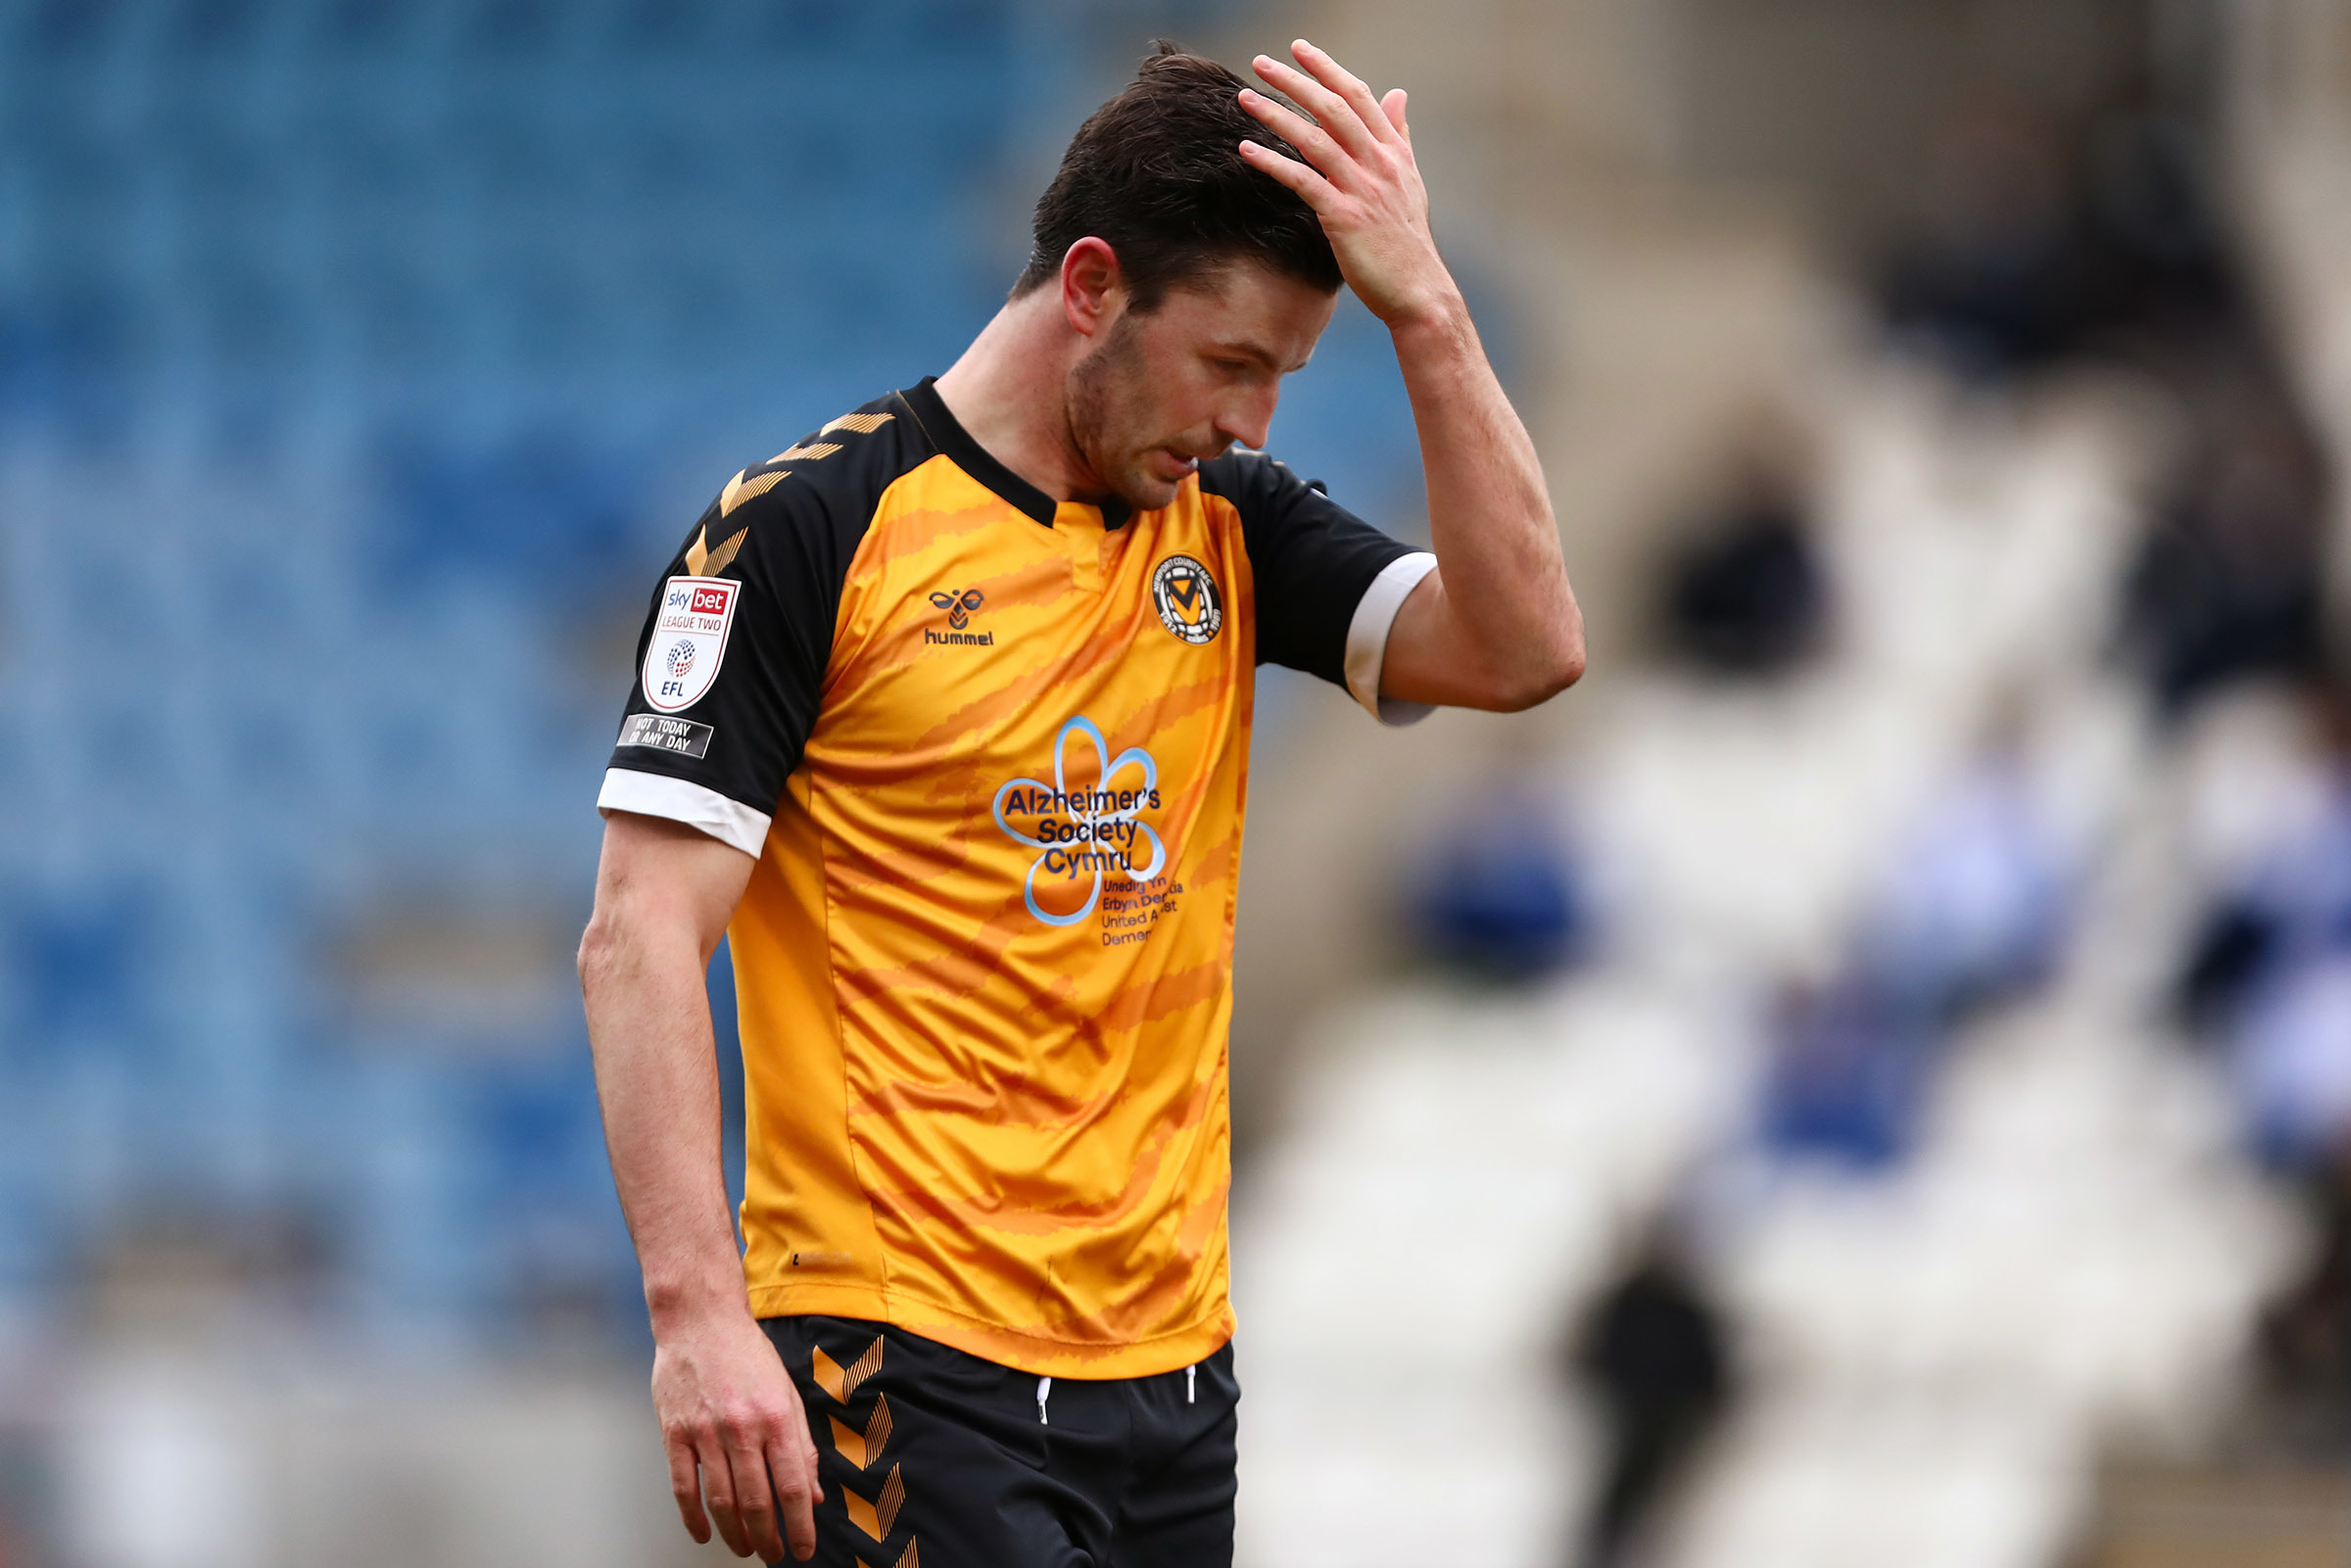 DISAPPOINTED: County striker Padraig Amond reacts after a missed chance